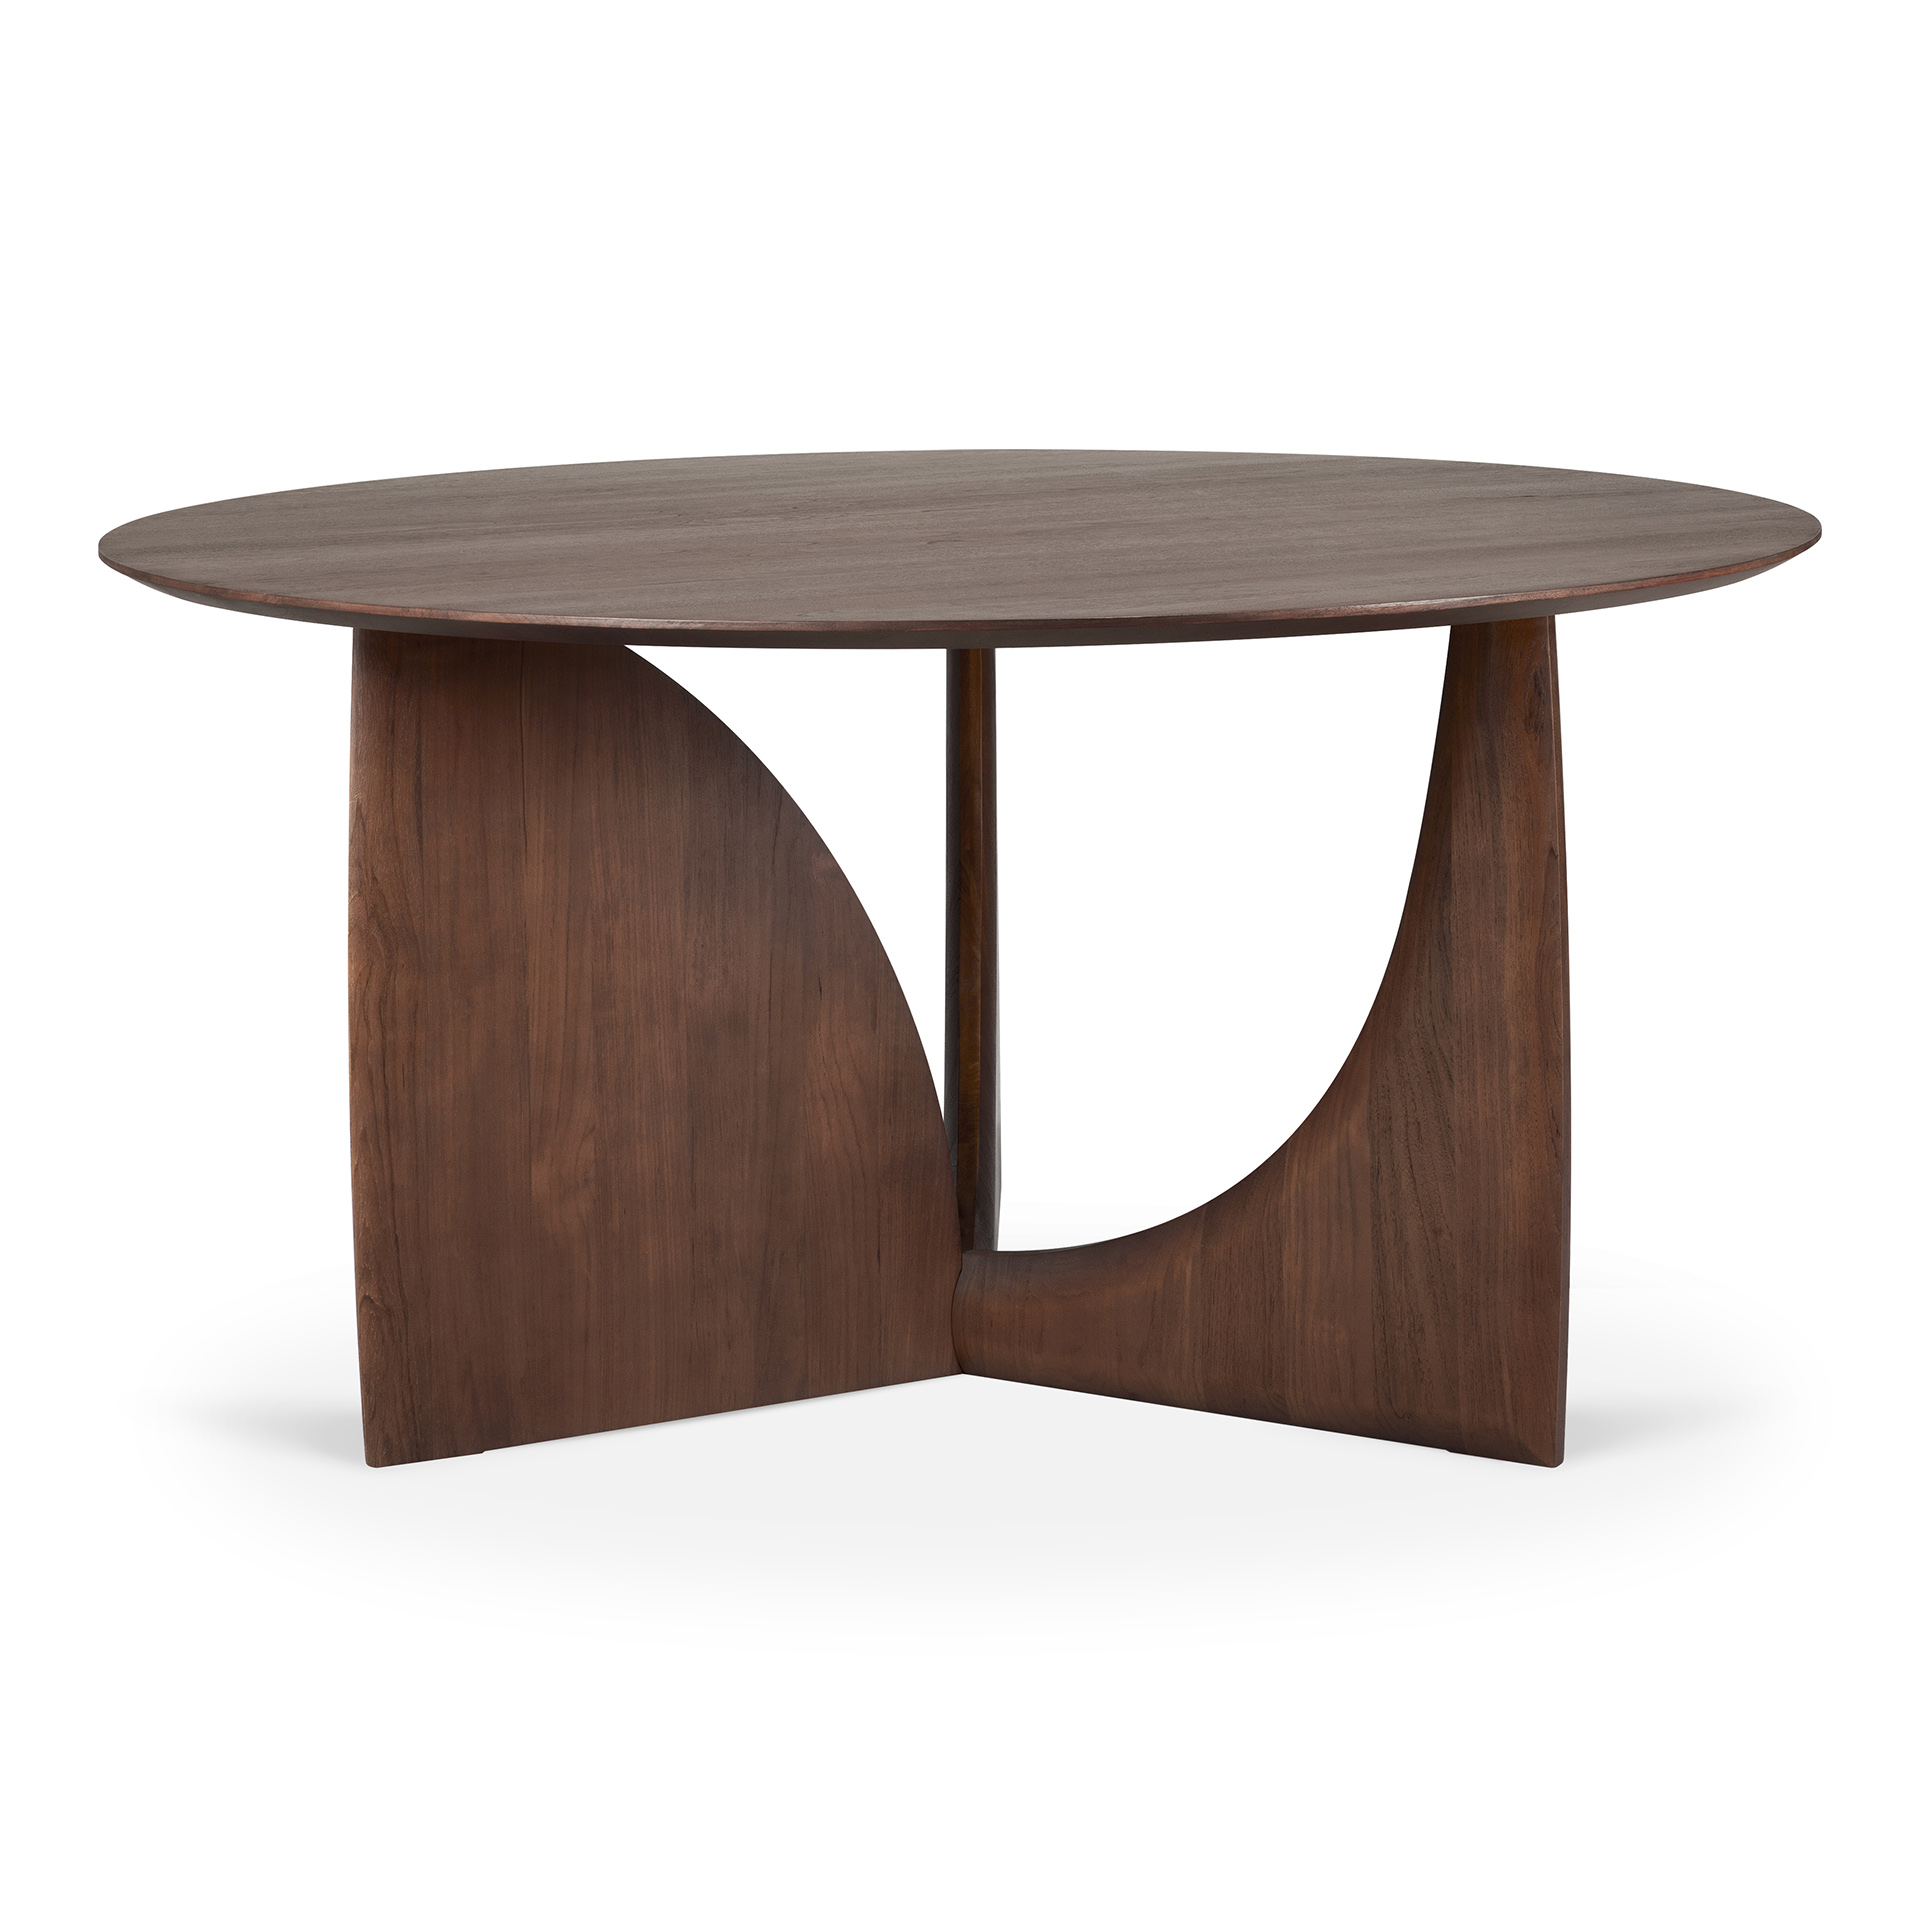 Geometric_dining_table_varnished_teak_brown_round_Ethnicraft-1